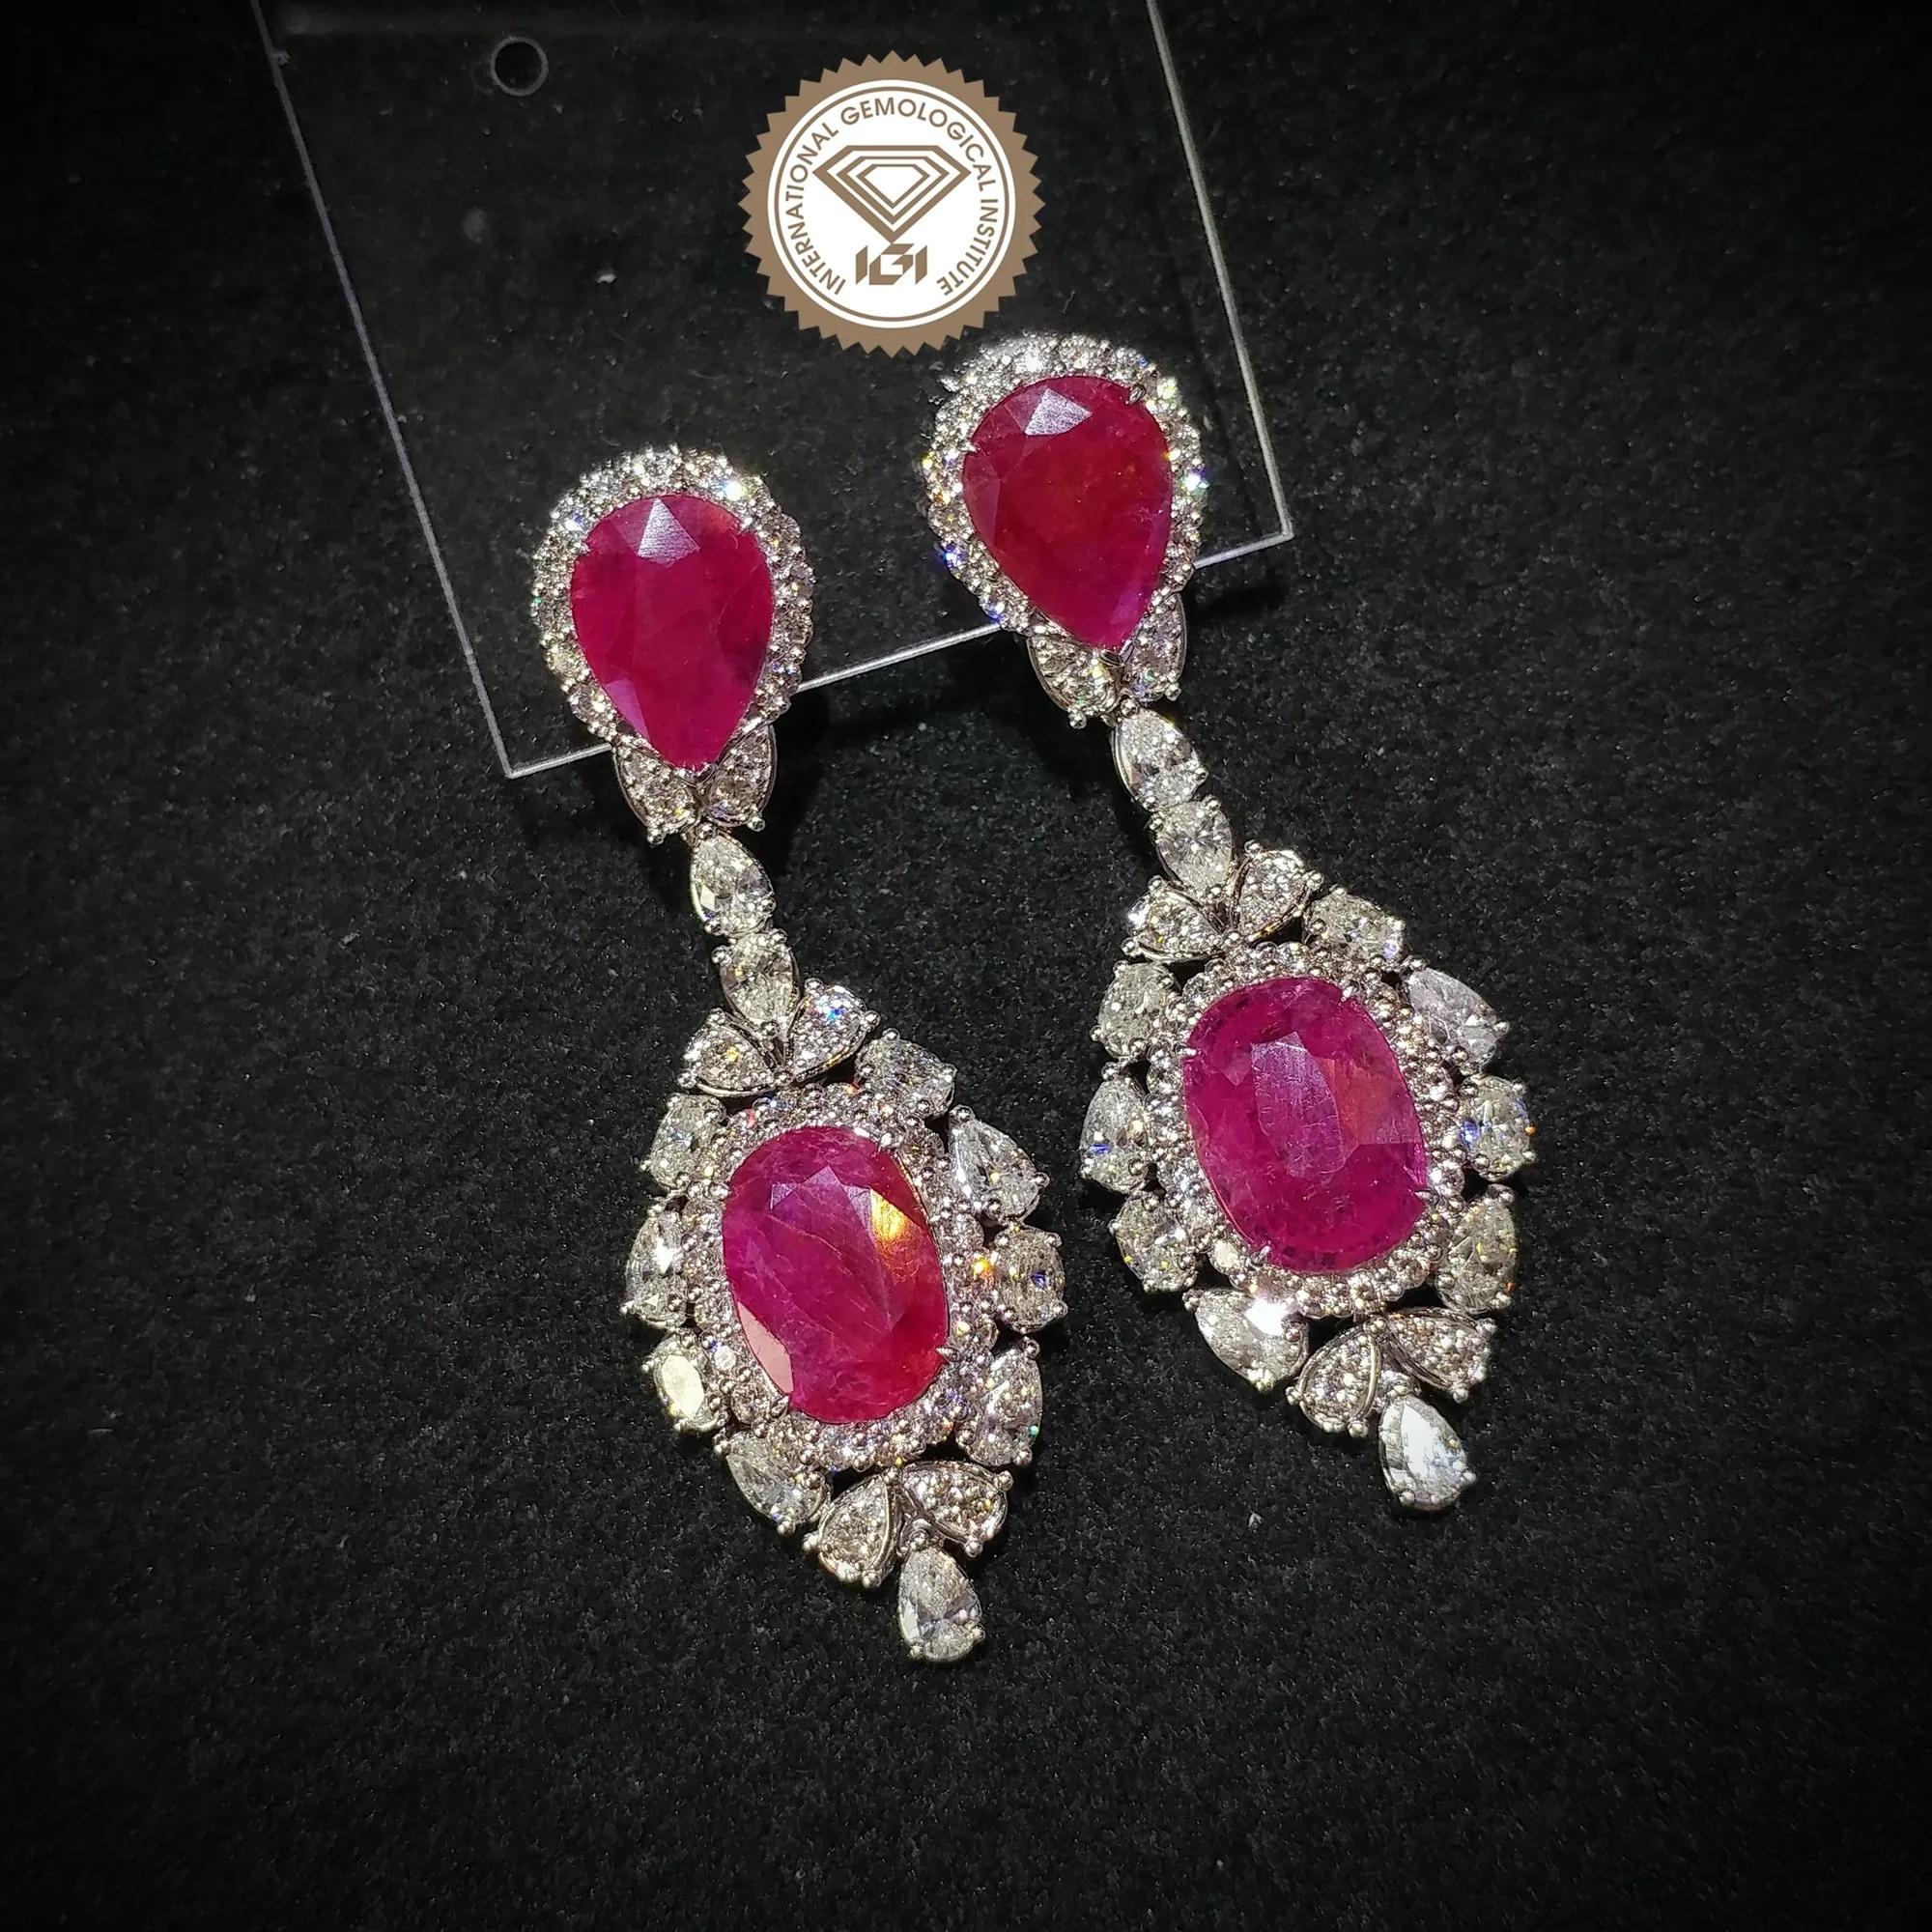 This extravagantly bold pair of earrings are not for the faint of heart! 1
6.74 carats of deep red  pear-shaped and oval-shaped rubies take center stage in these modern design drop earrings. The 6.86 carats of round,pear and oval cut white diamonds